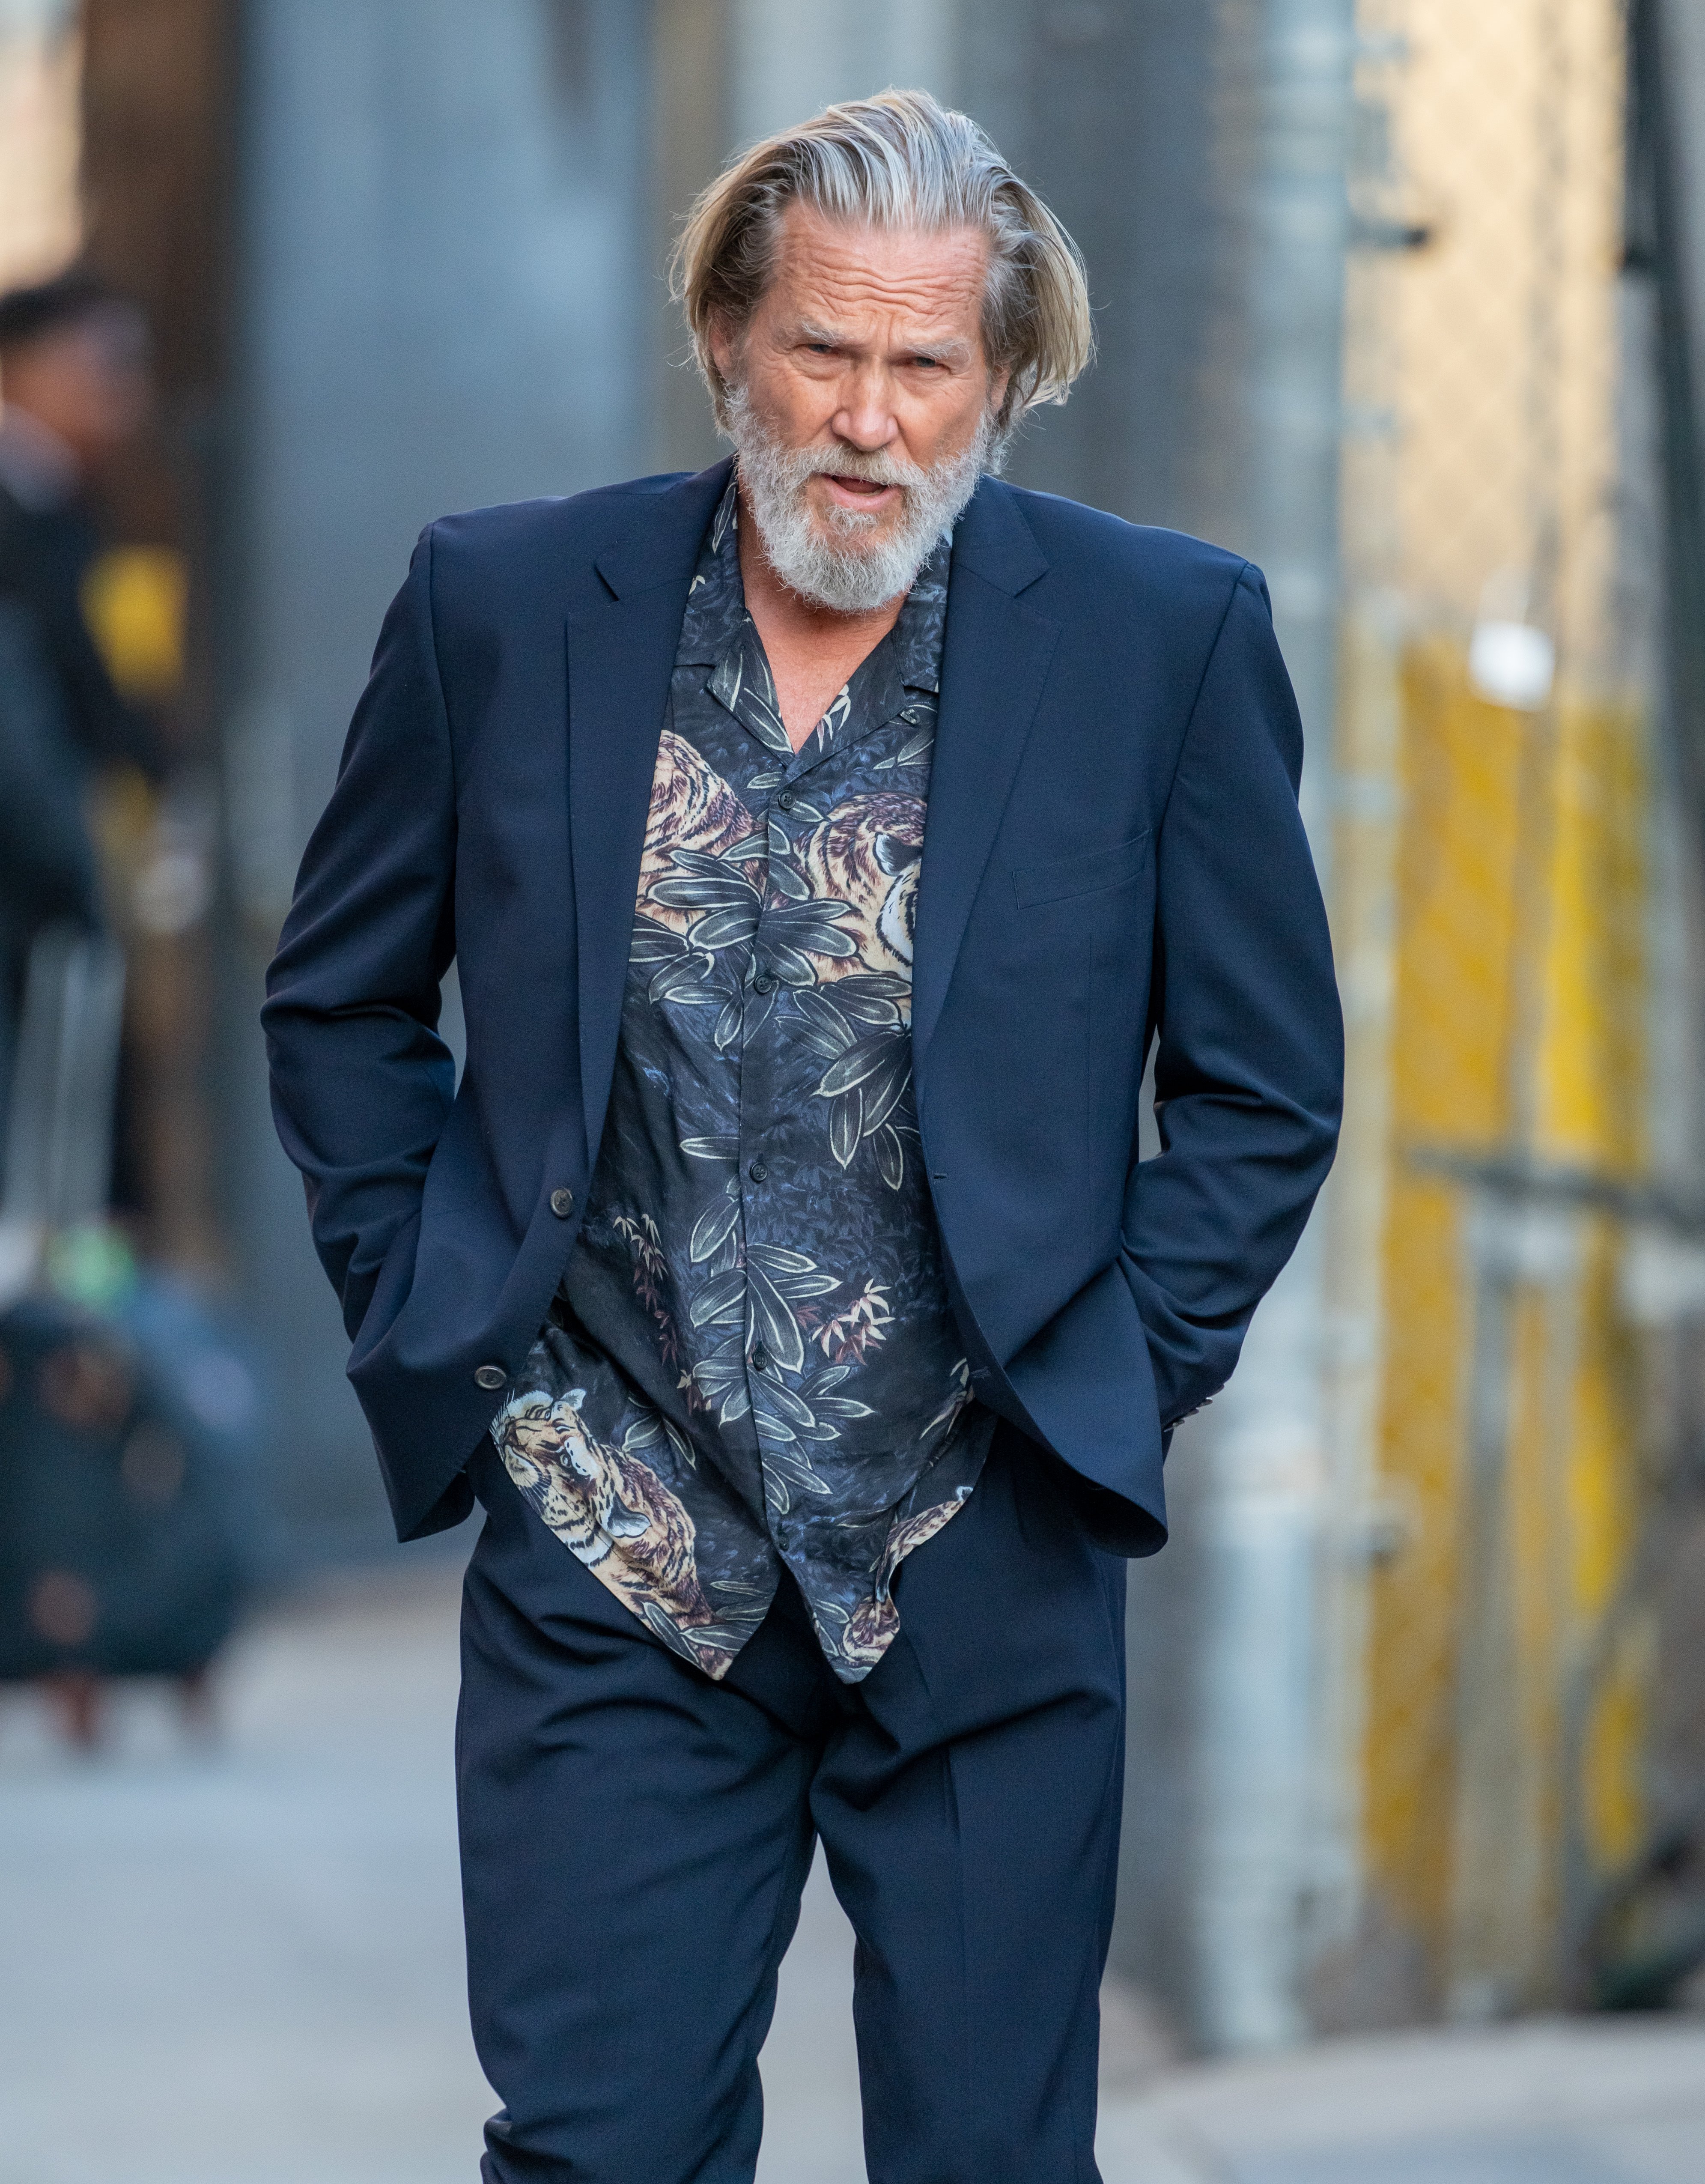 Jeff Bridges is seen at 'Jimmy Kimmel Live' on October 14, 2019 in Los Angeles, California. | Source: Getty Images